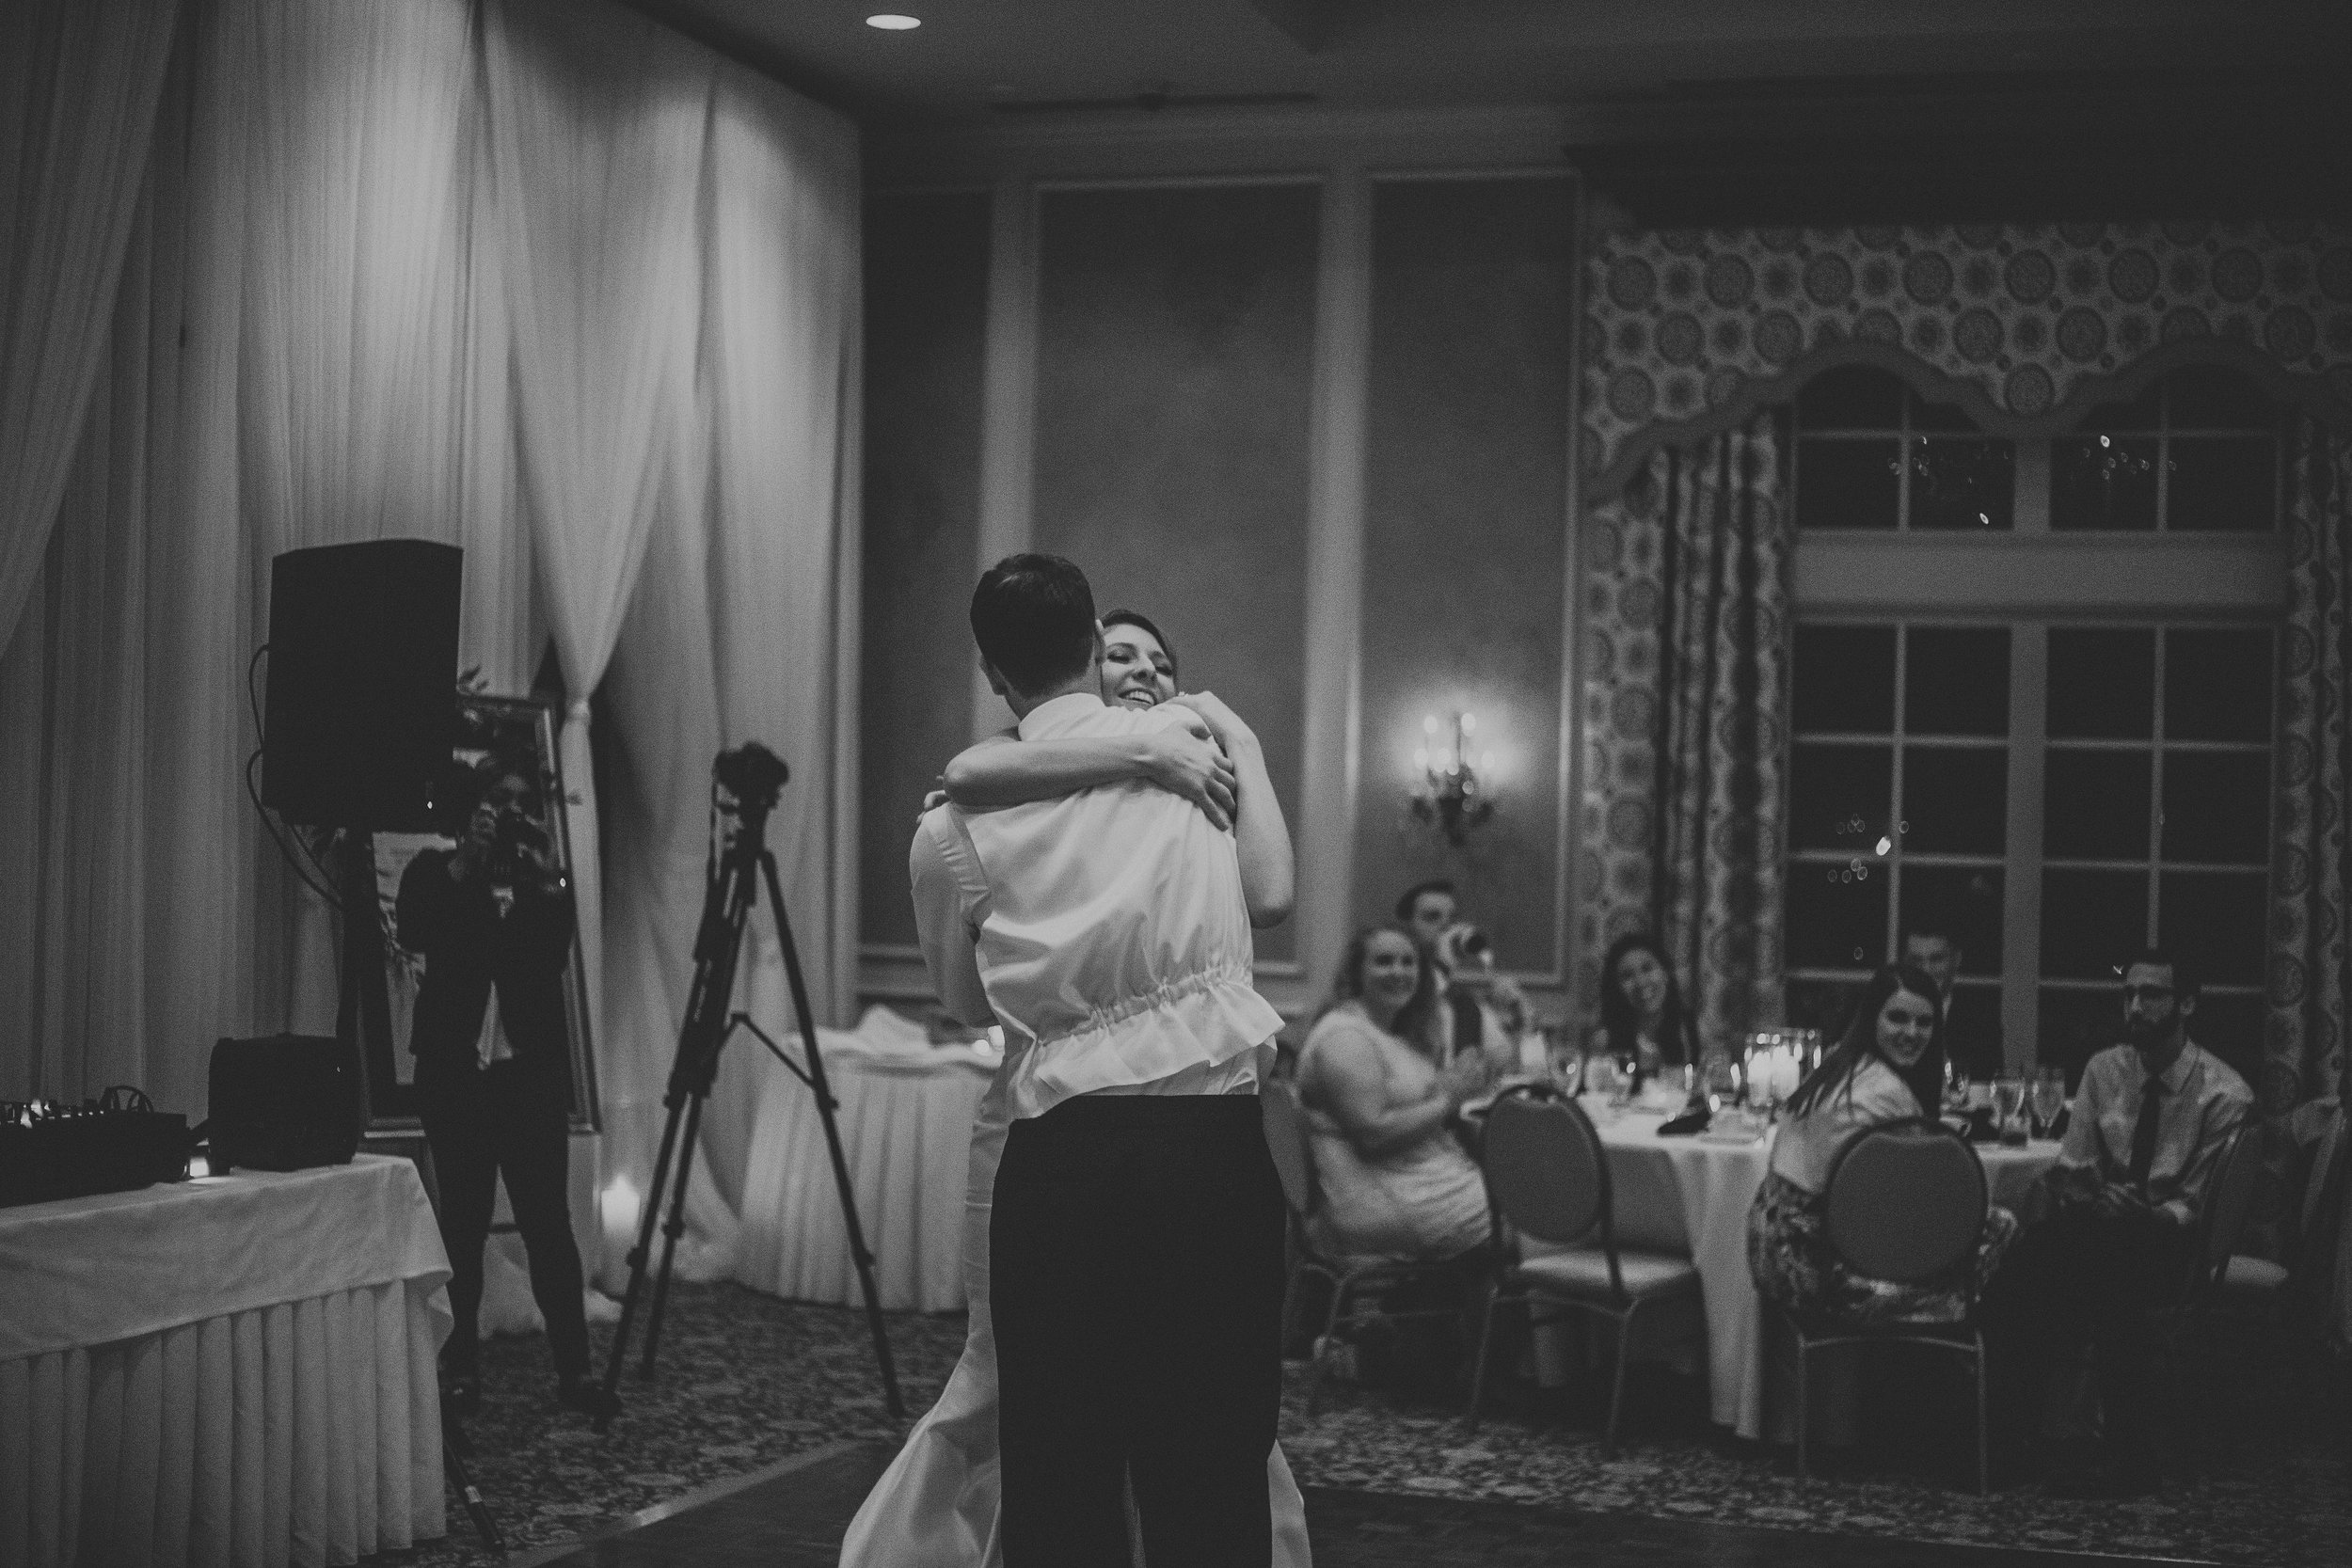  Our first dance is one of the things I loved most about the wedding. We had a blast learning it, and worked so hard! 